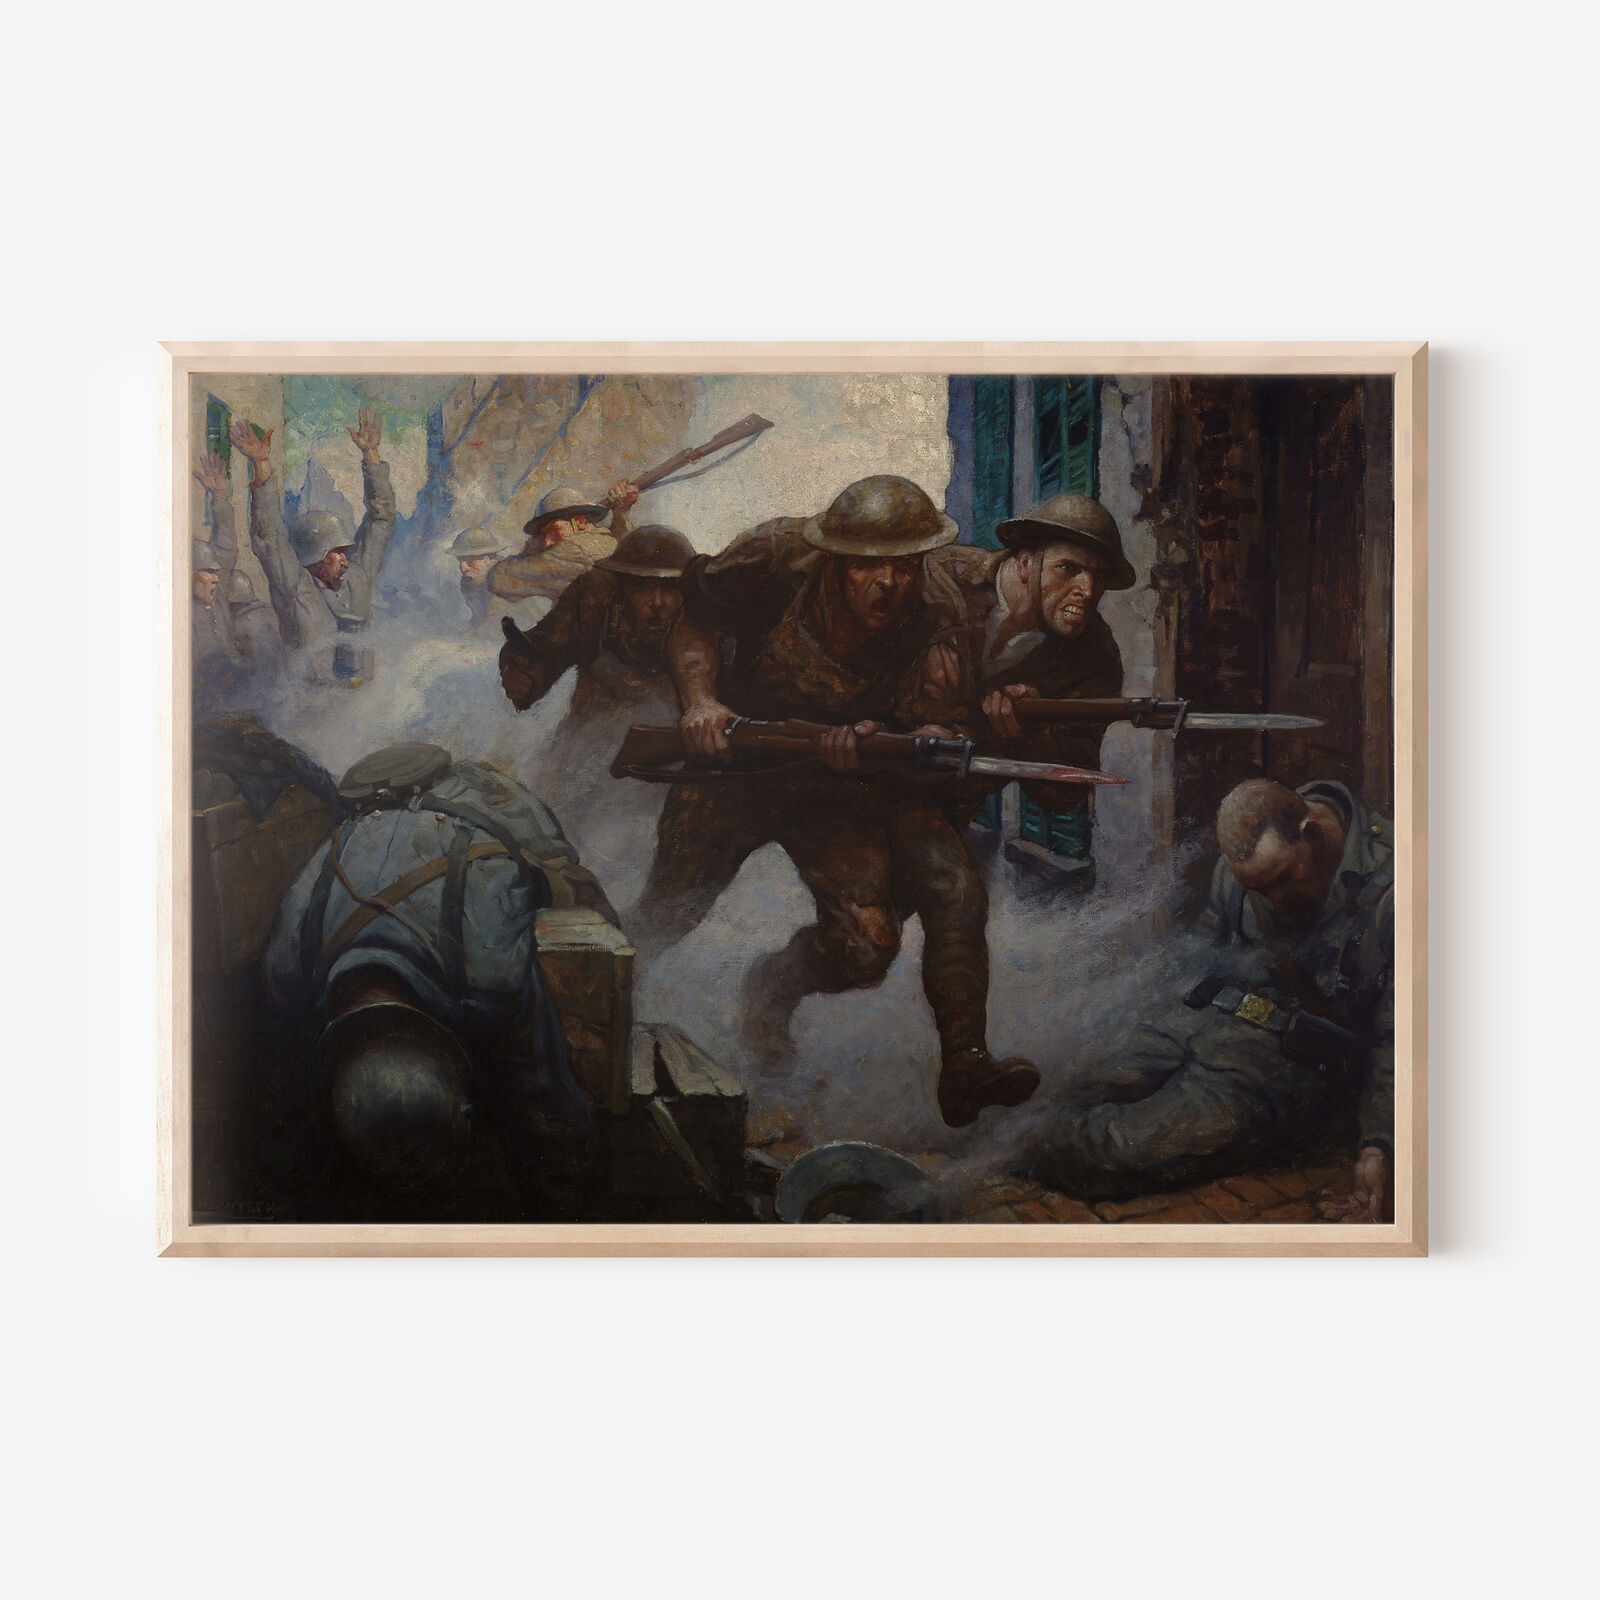 N. C. Wyeth - American Doughboys at Chateau Thierry - Poster Art Print, Painting